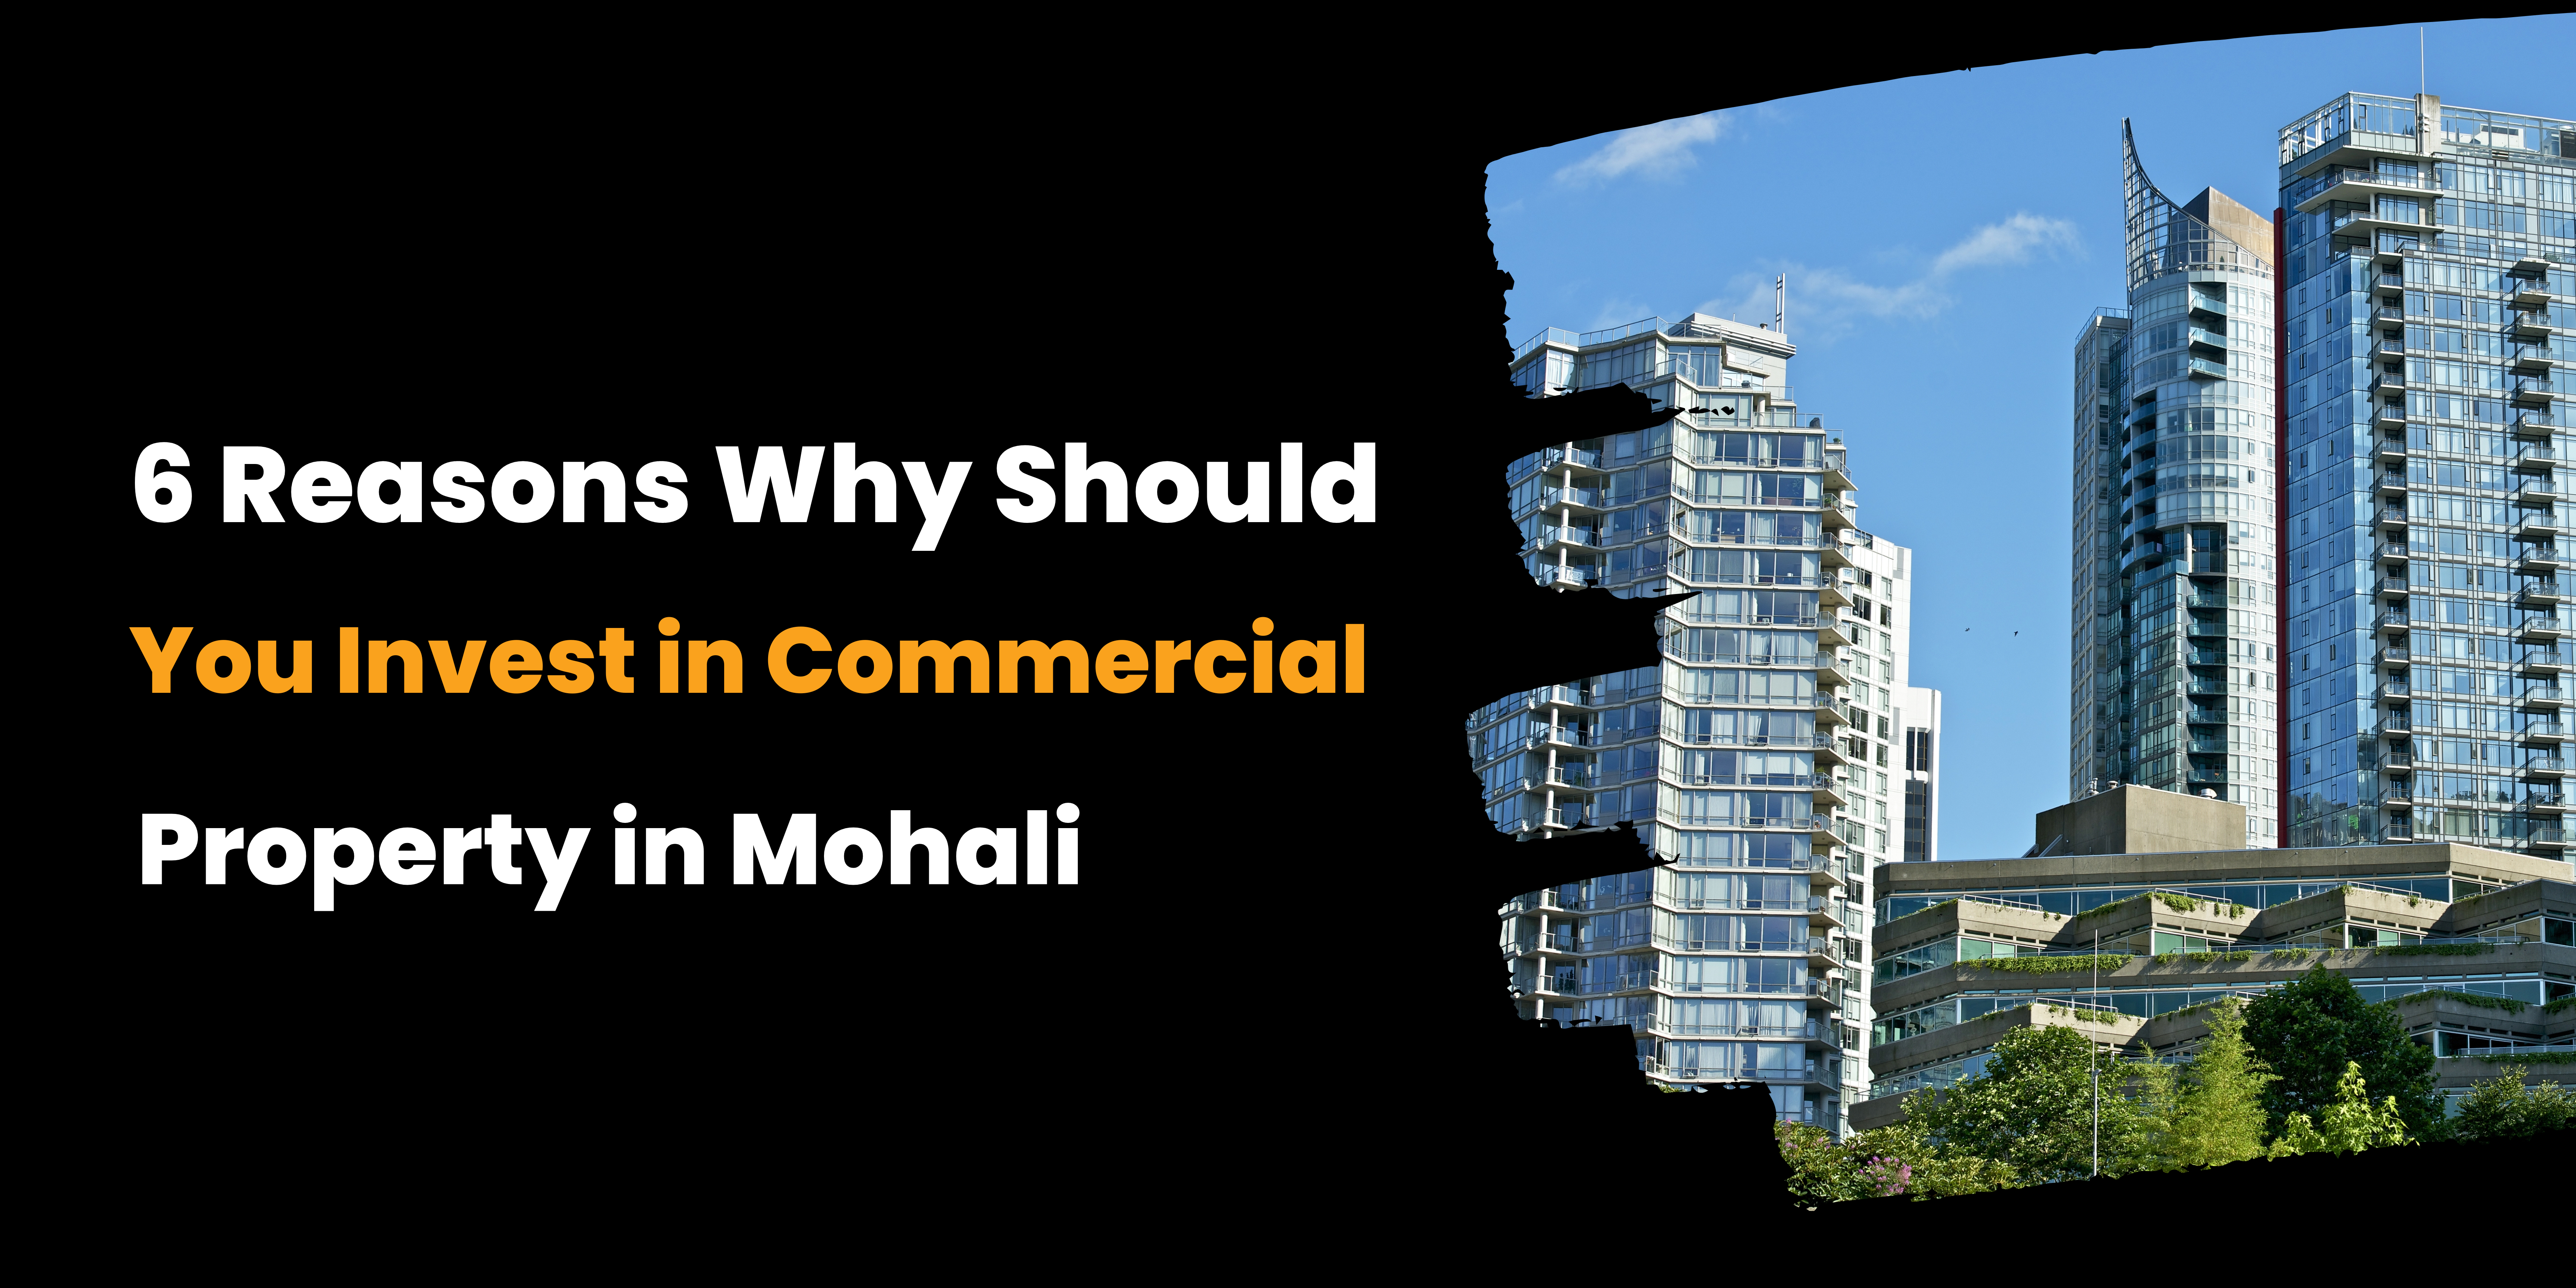 10 Reasons Why Should You Invest in Commercial Property in Mohali